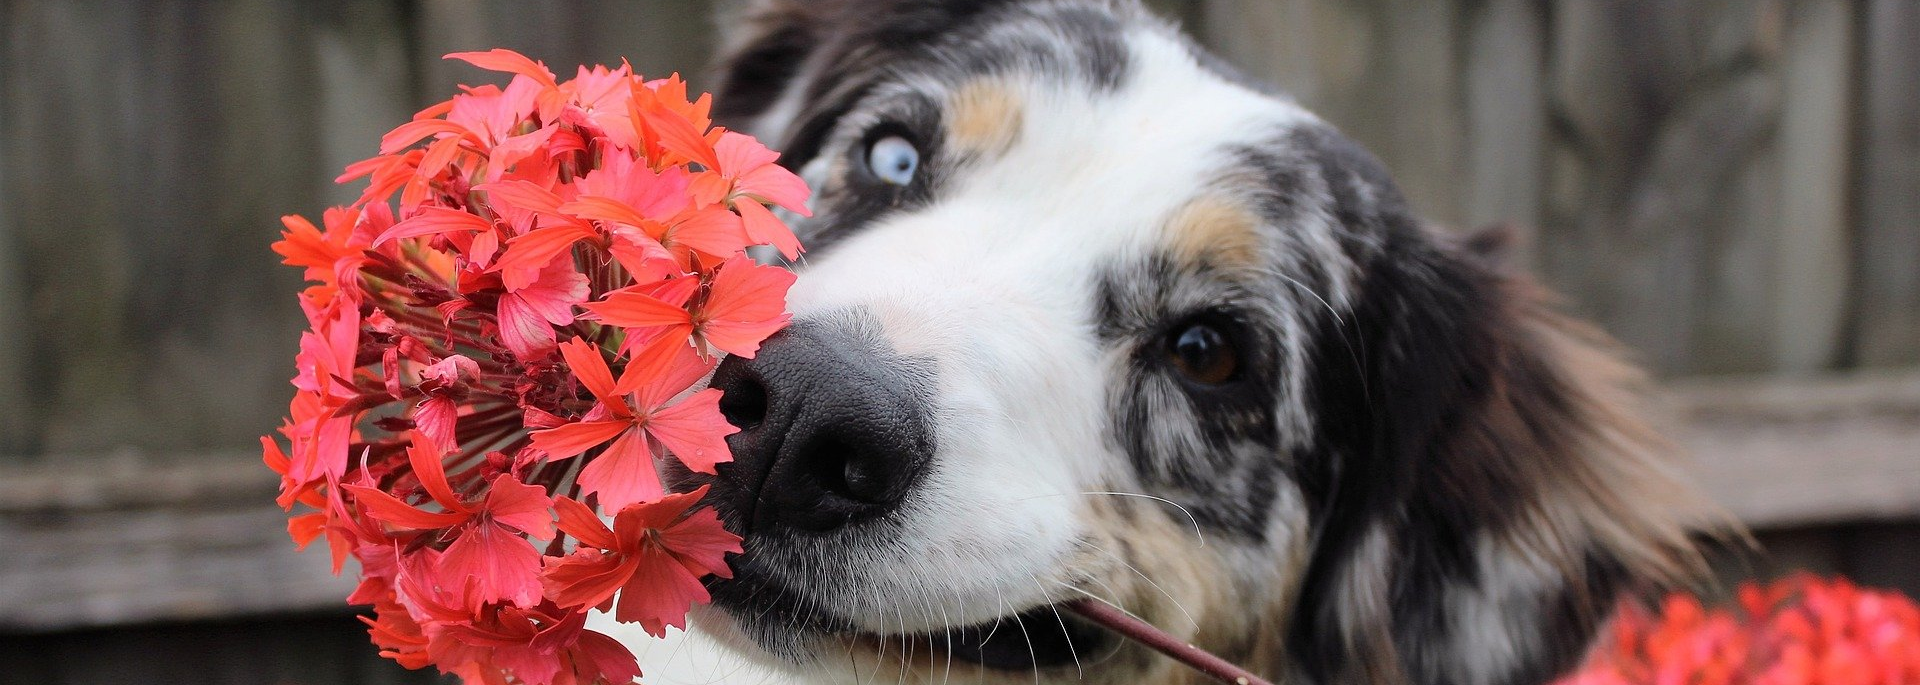 Dog Holding Flower in Mouth, Tilting Head